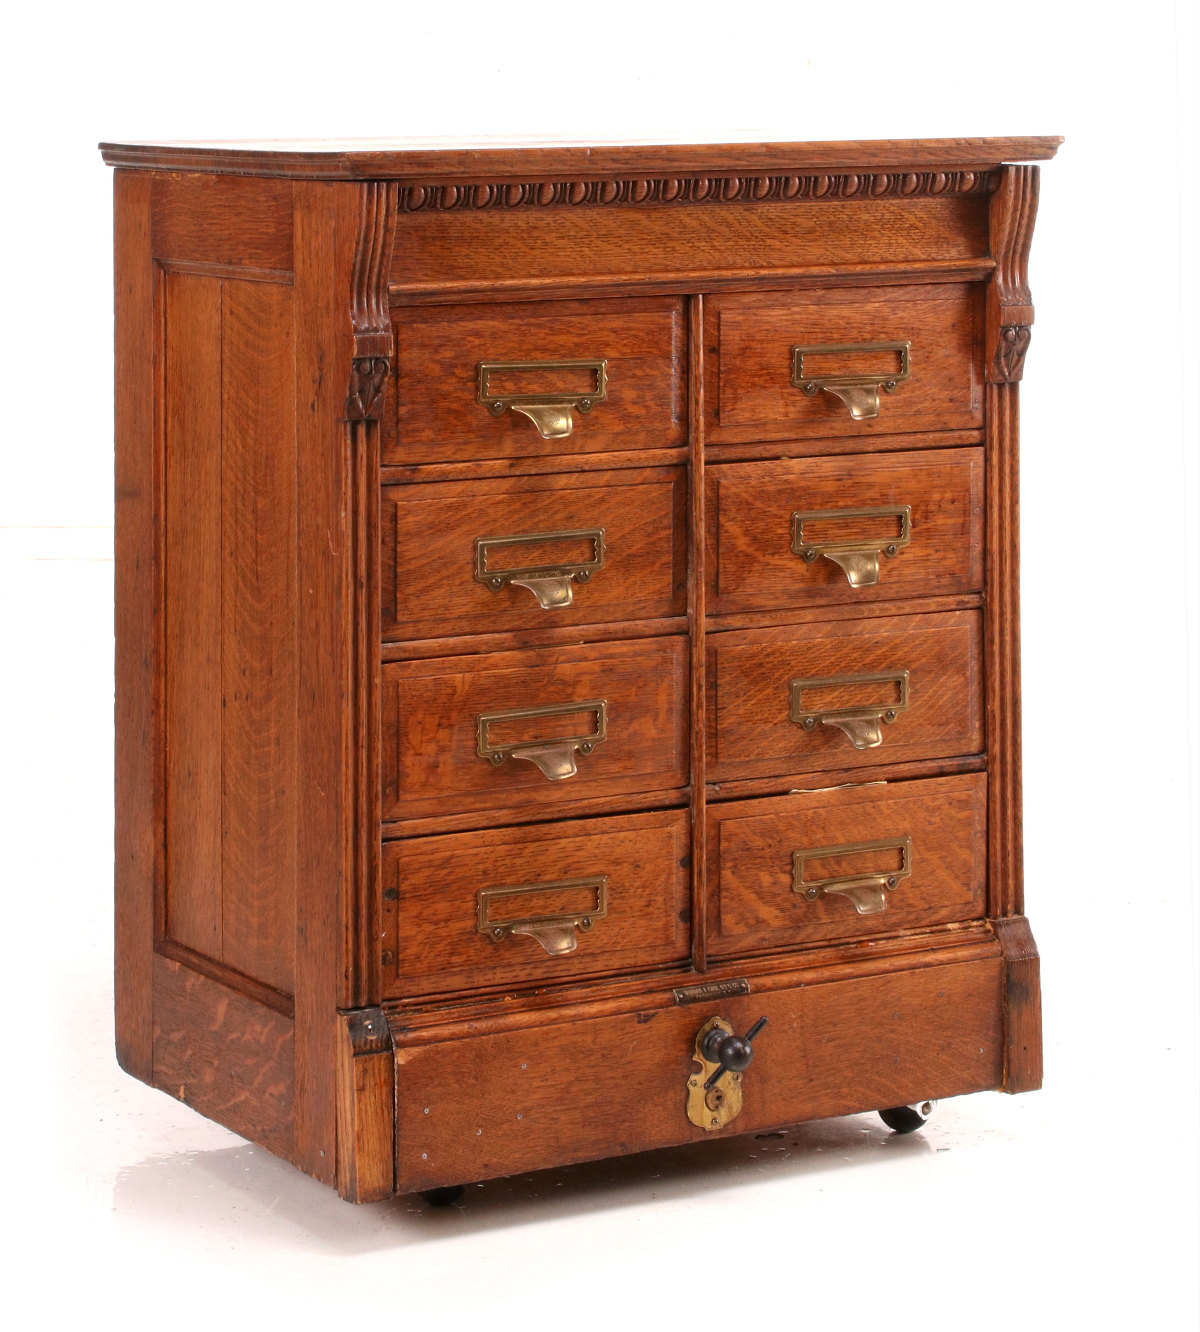 A SHORT OAK CASE OF DRAWERS WITH BRASS PULLS C. 1880